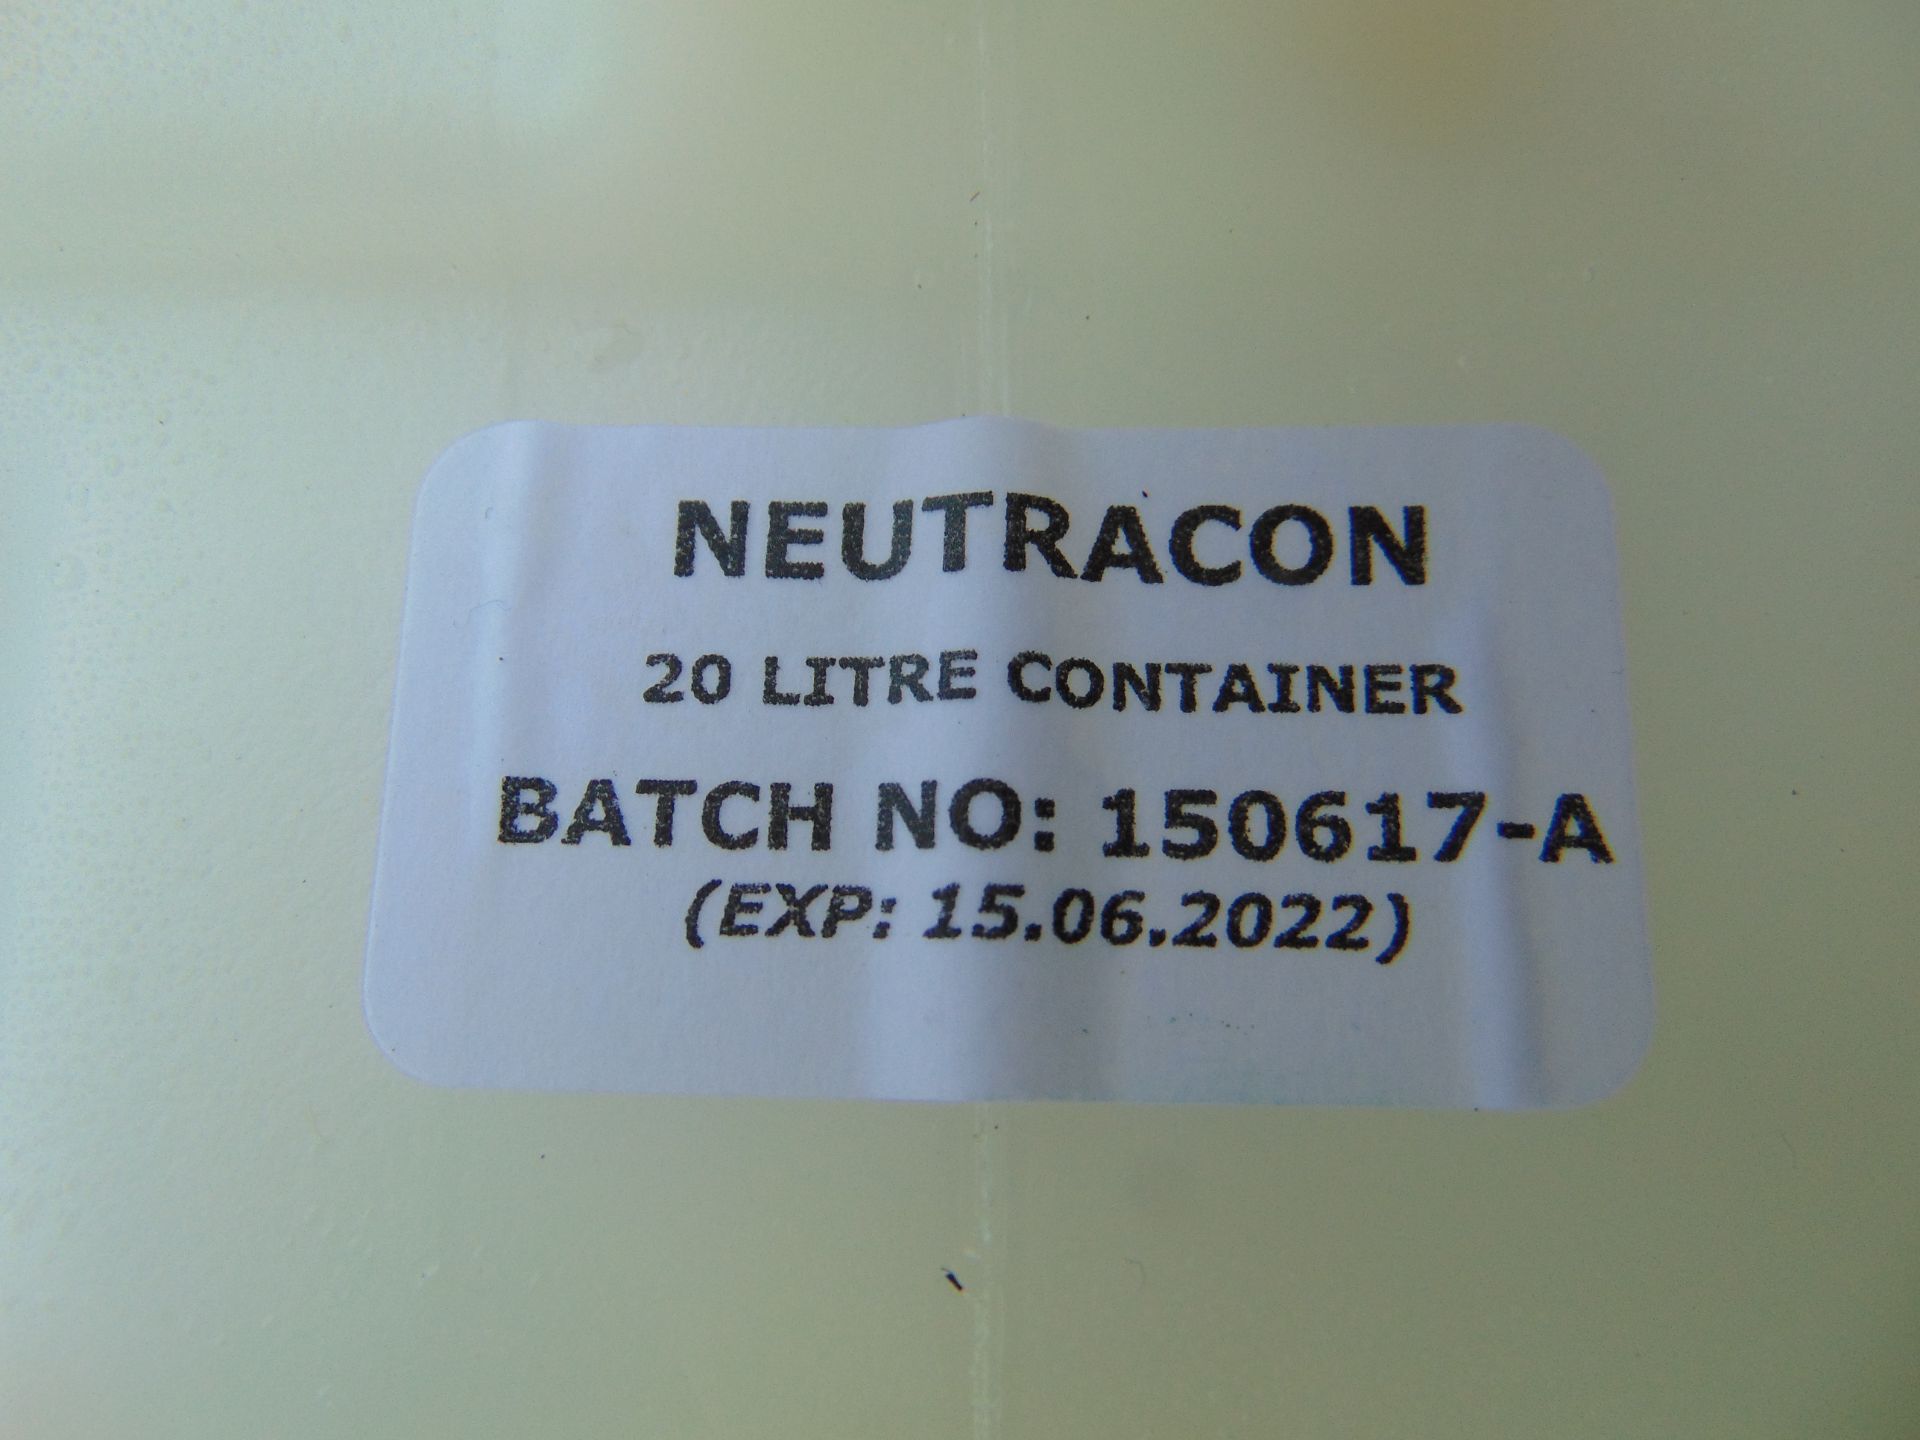 12 x 20 Litre Drums of Decon Neutracon - Image 4 of 4